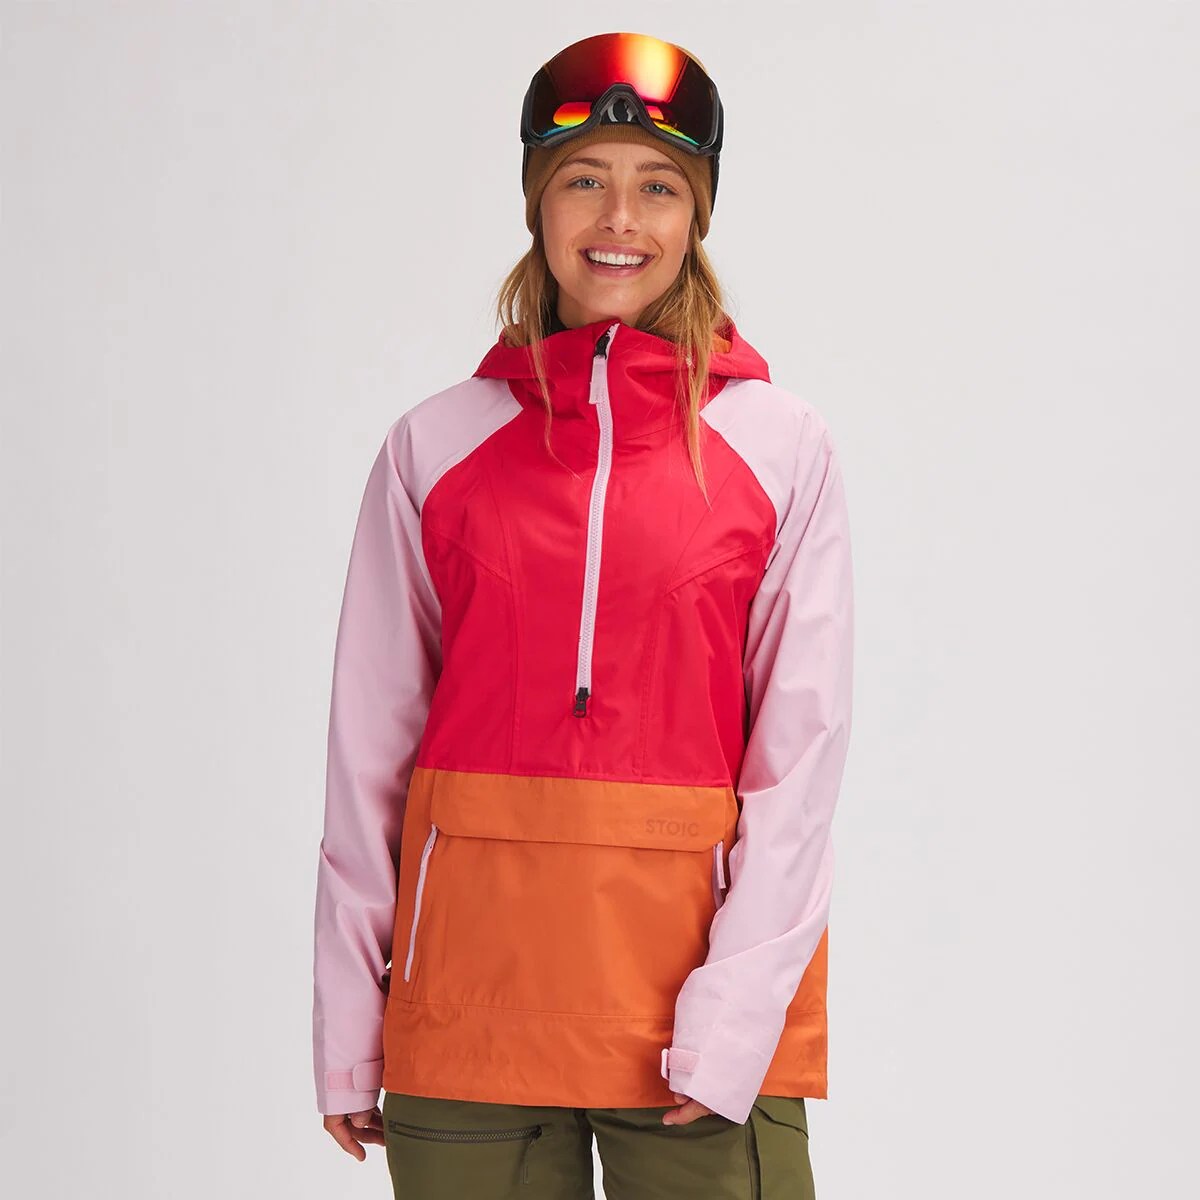 model with ski goggles wearing a stoic shell anorak in red, orange and pink which is now on sale at backcountry